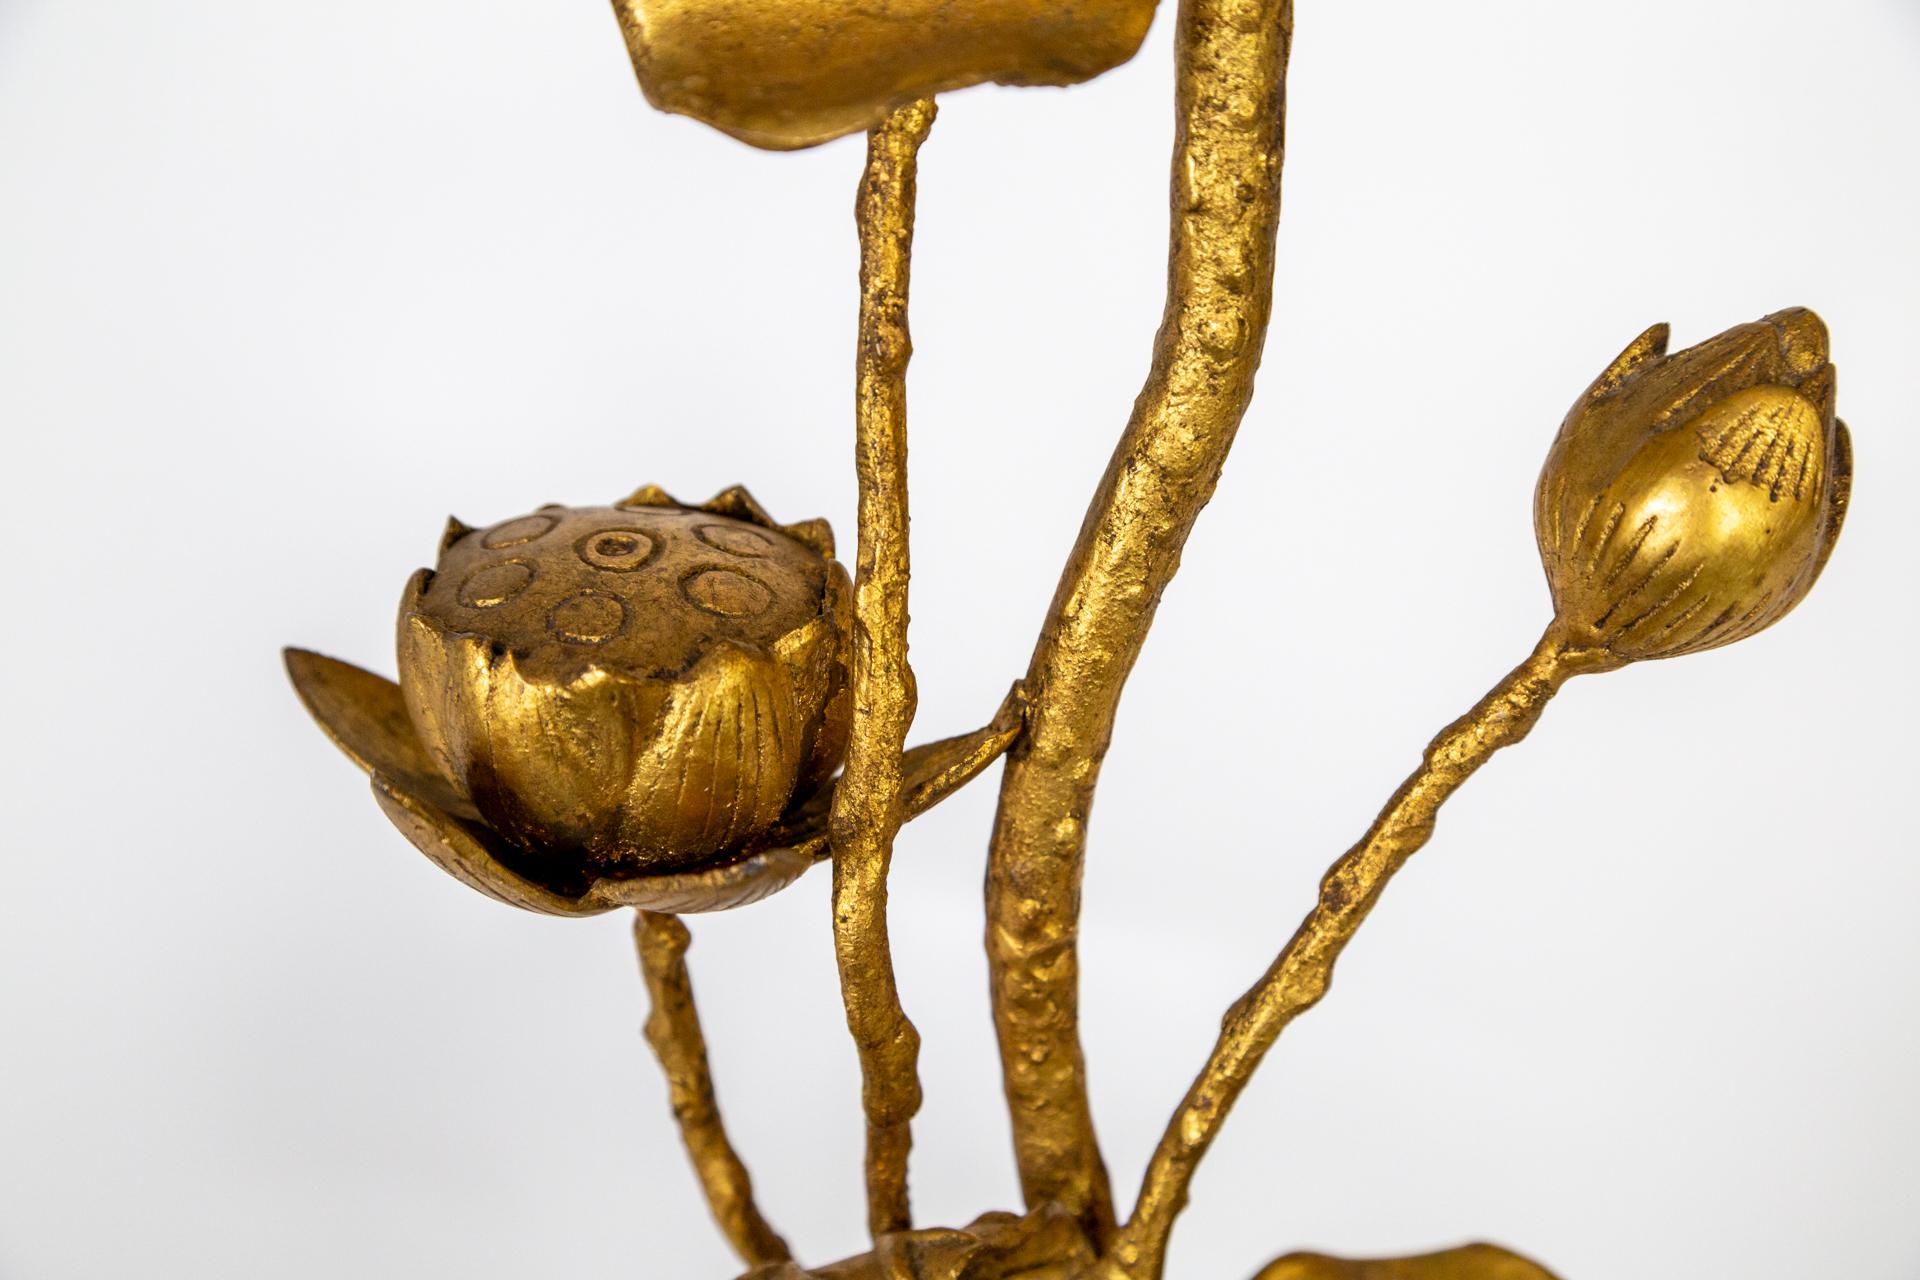 A gorgeous, sculptural lamp featuring substantial stems with buds, leaves and blooms on an Art Nouveau-esque bellflower. Whimsical and elegant. Significant in size and made of gilded bronze in the mid 20th century. Newly wired with a dimmer socket.